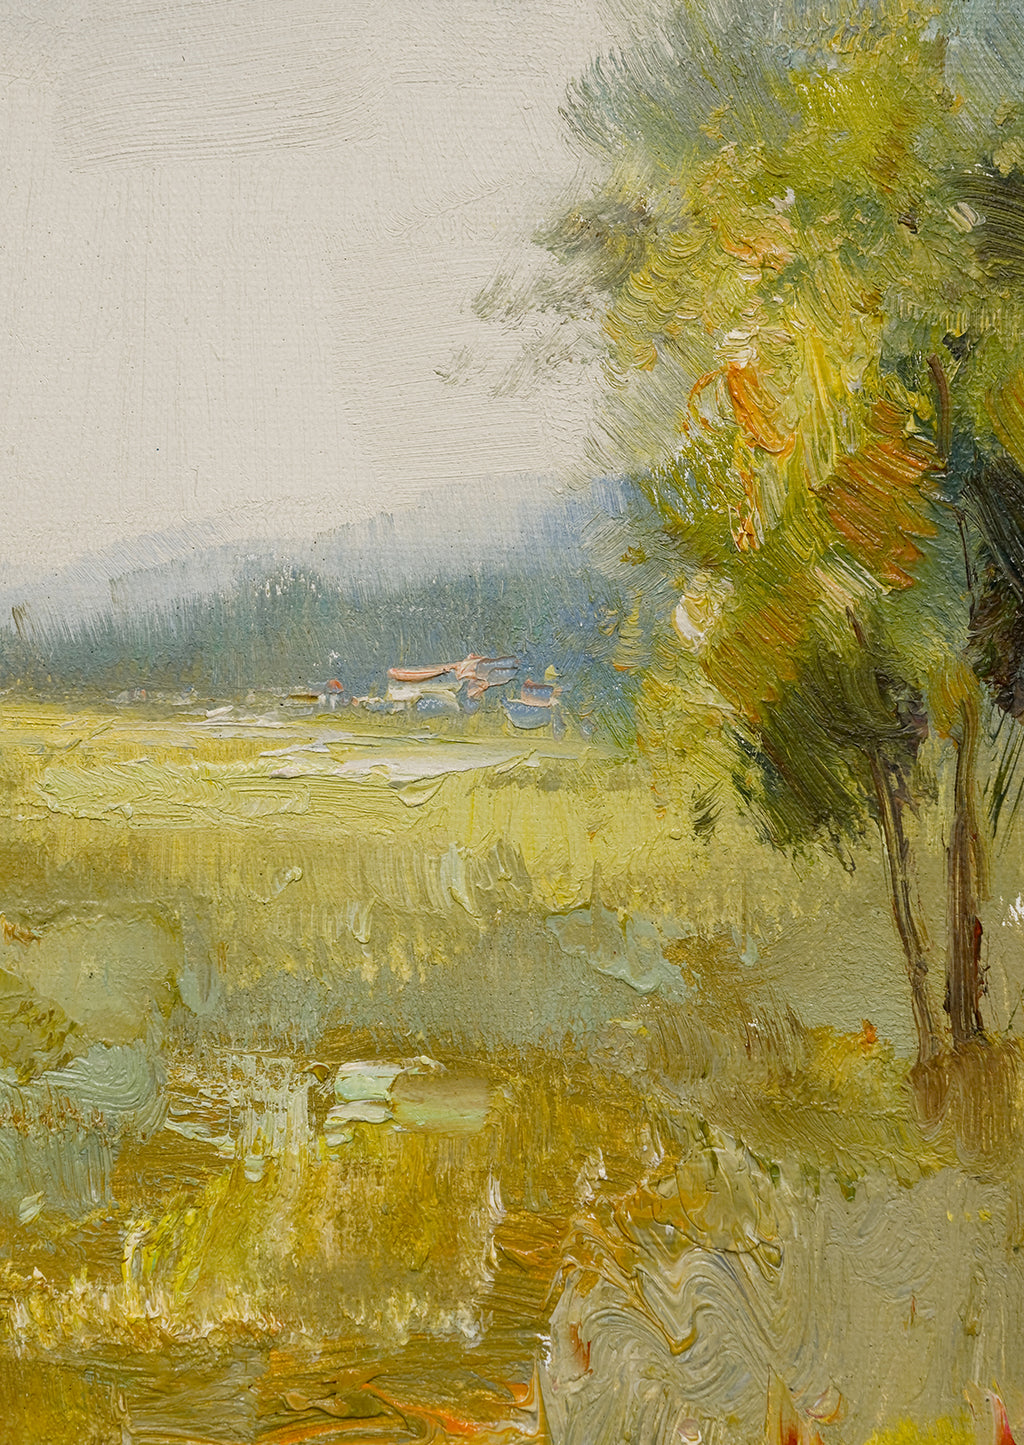 2: A framed oil landscape painting of a yellow-green meadow.